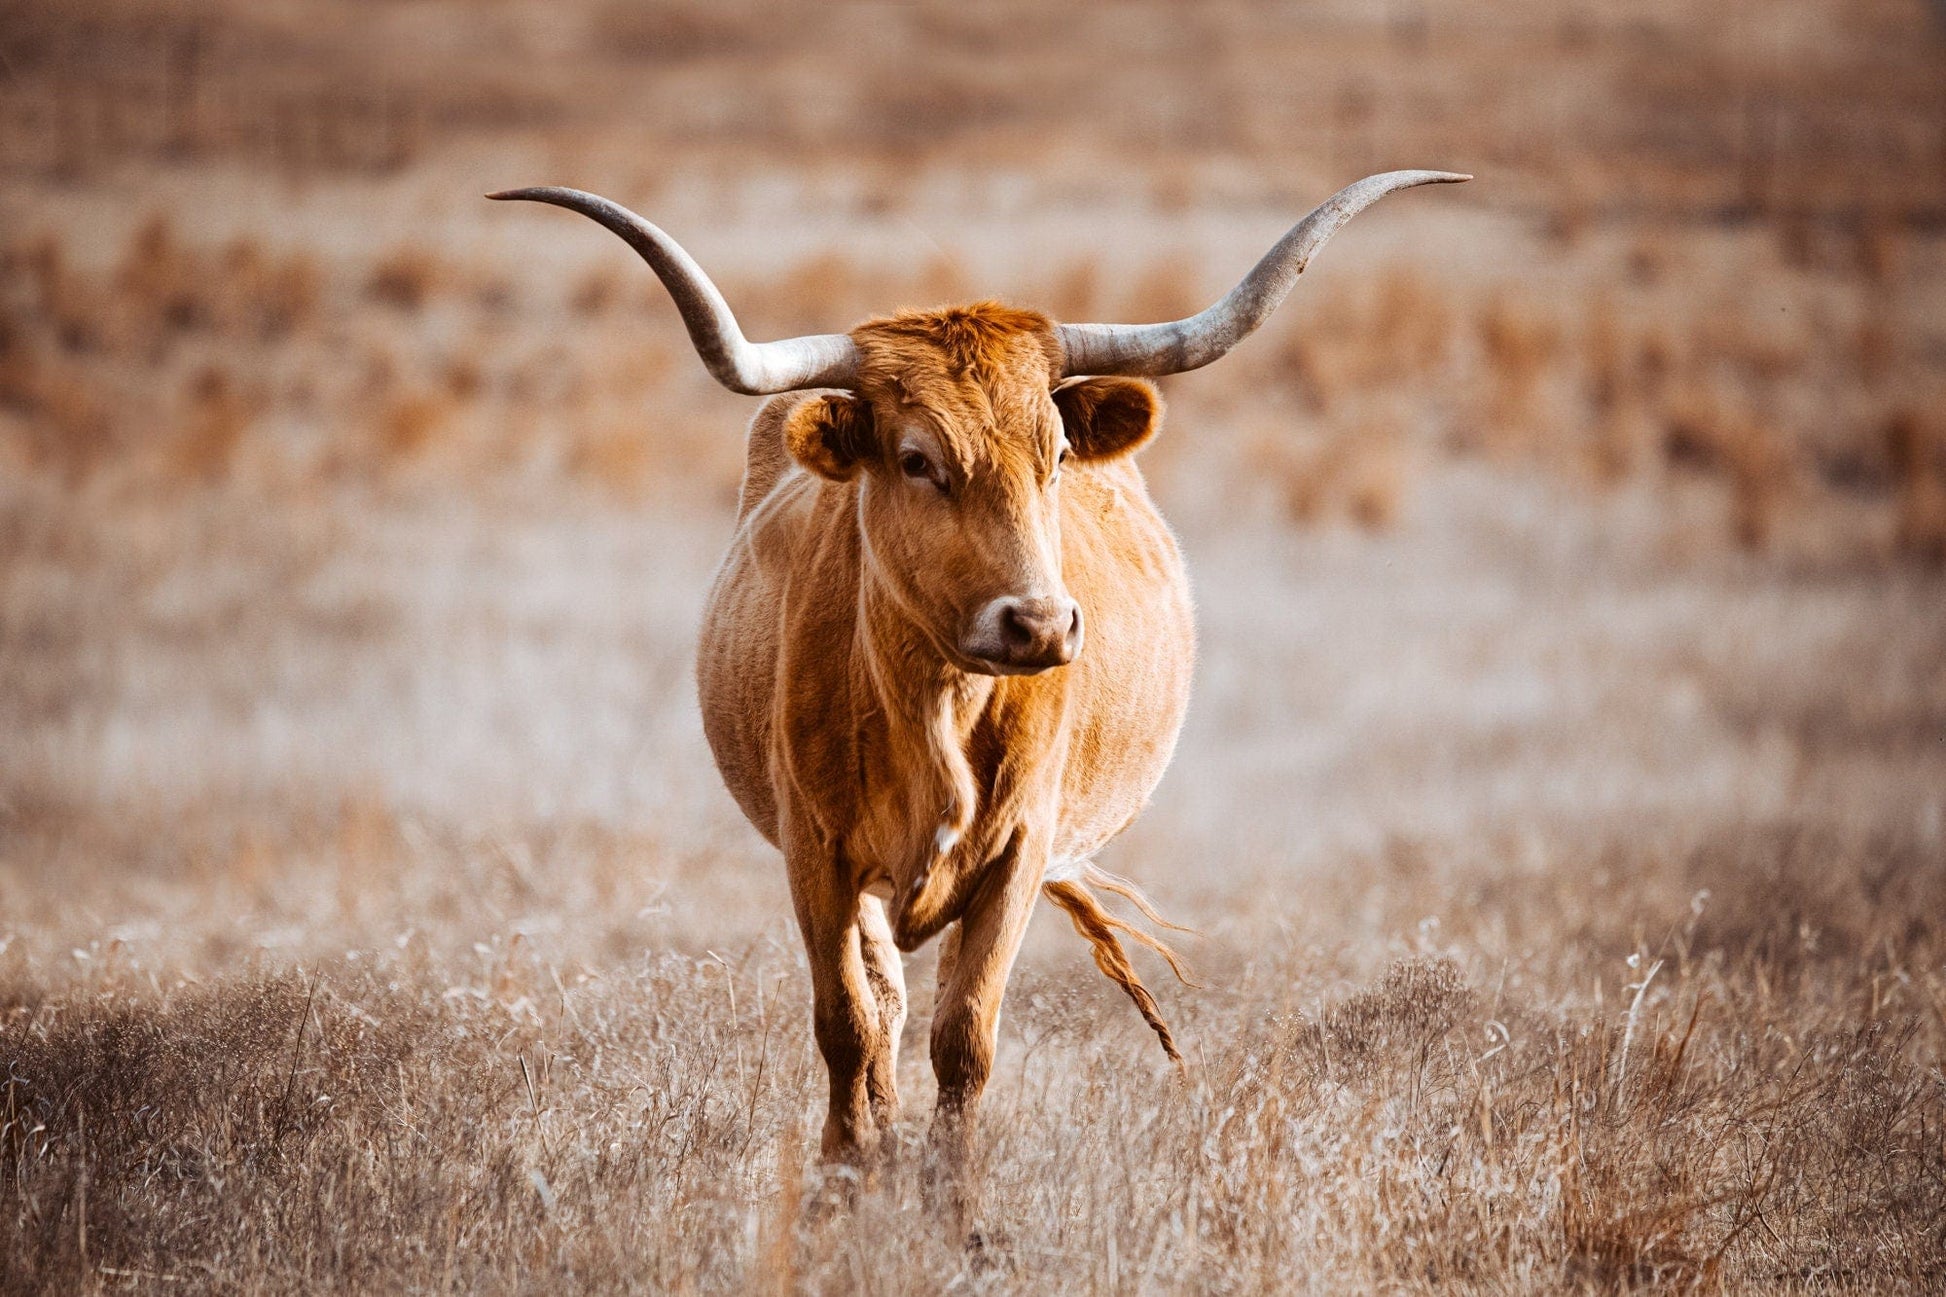 Texas Longhorn Cow Wall Canvas - Red Longhorn Paper Photo Print / 12 x 18 Inches Wall Art Teri James Photography